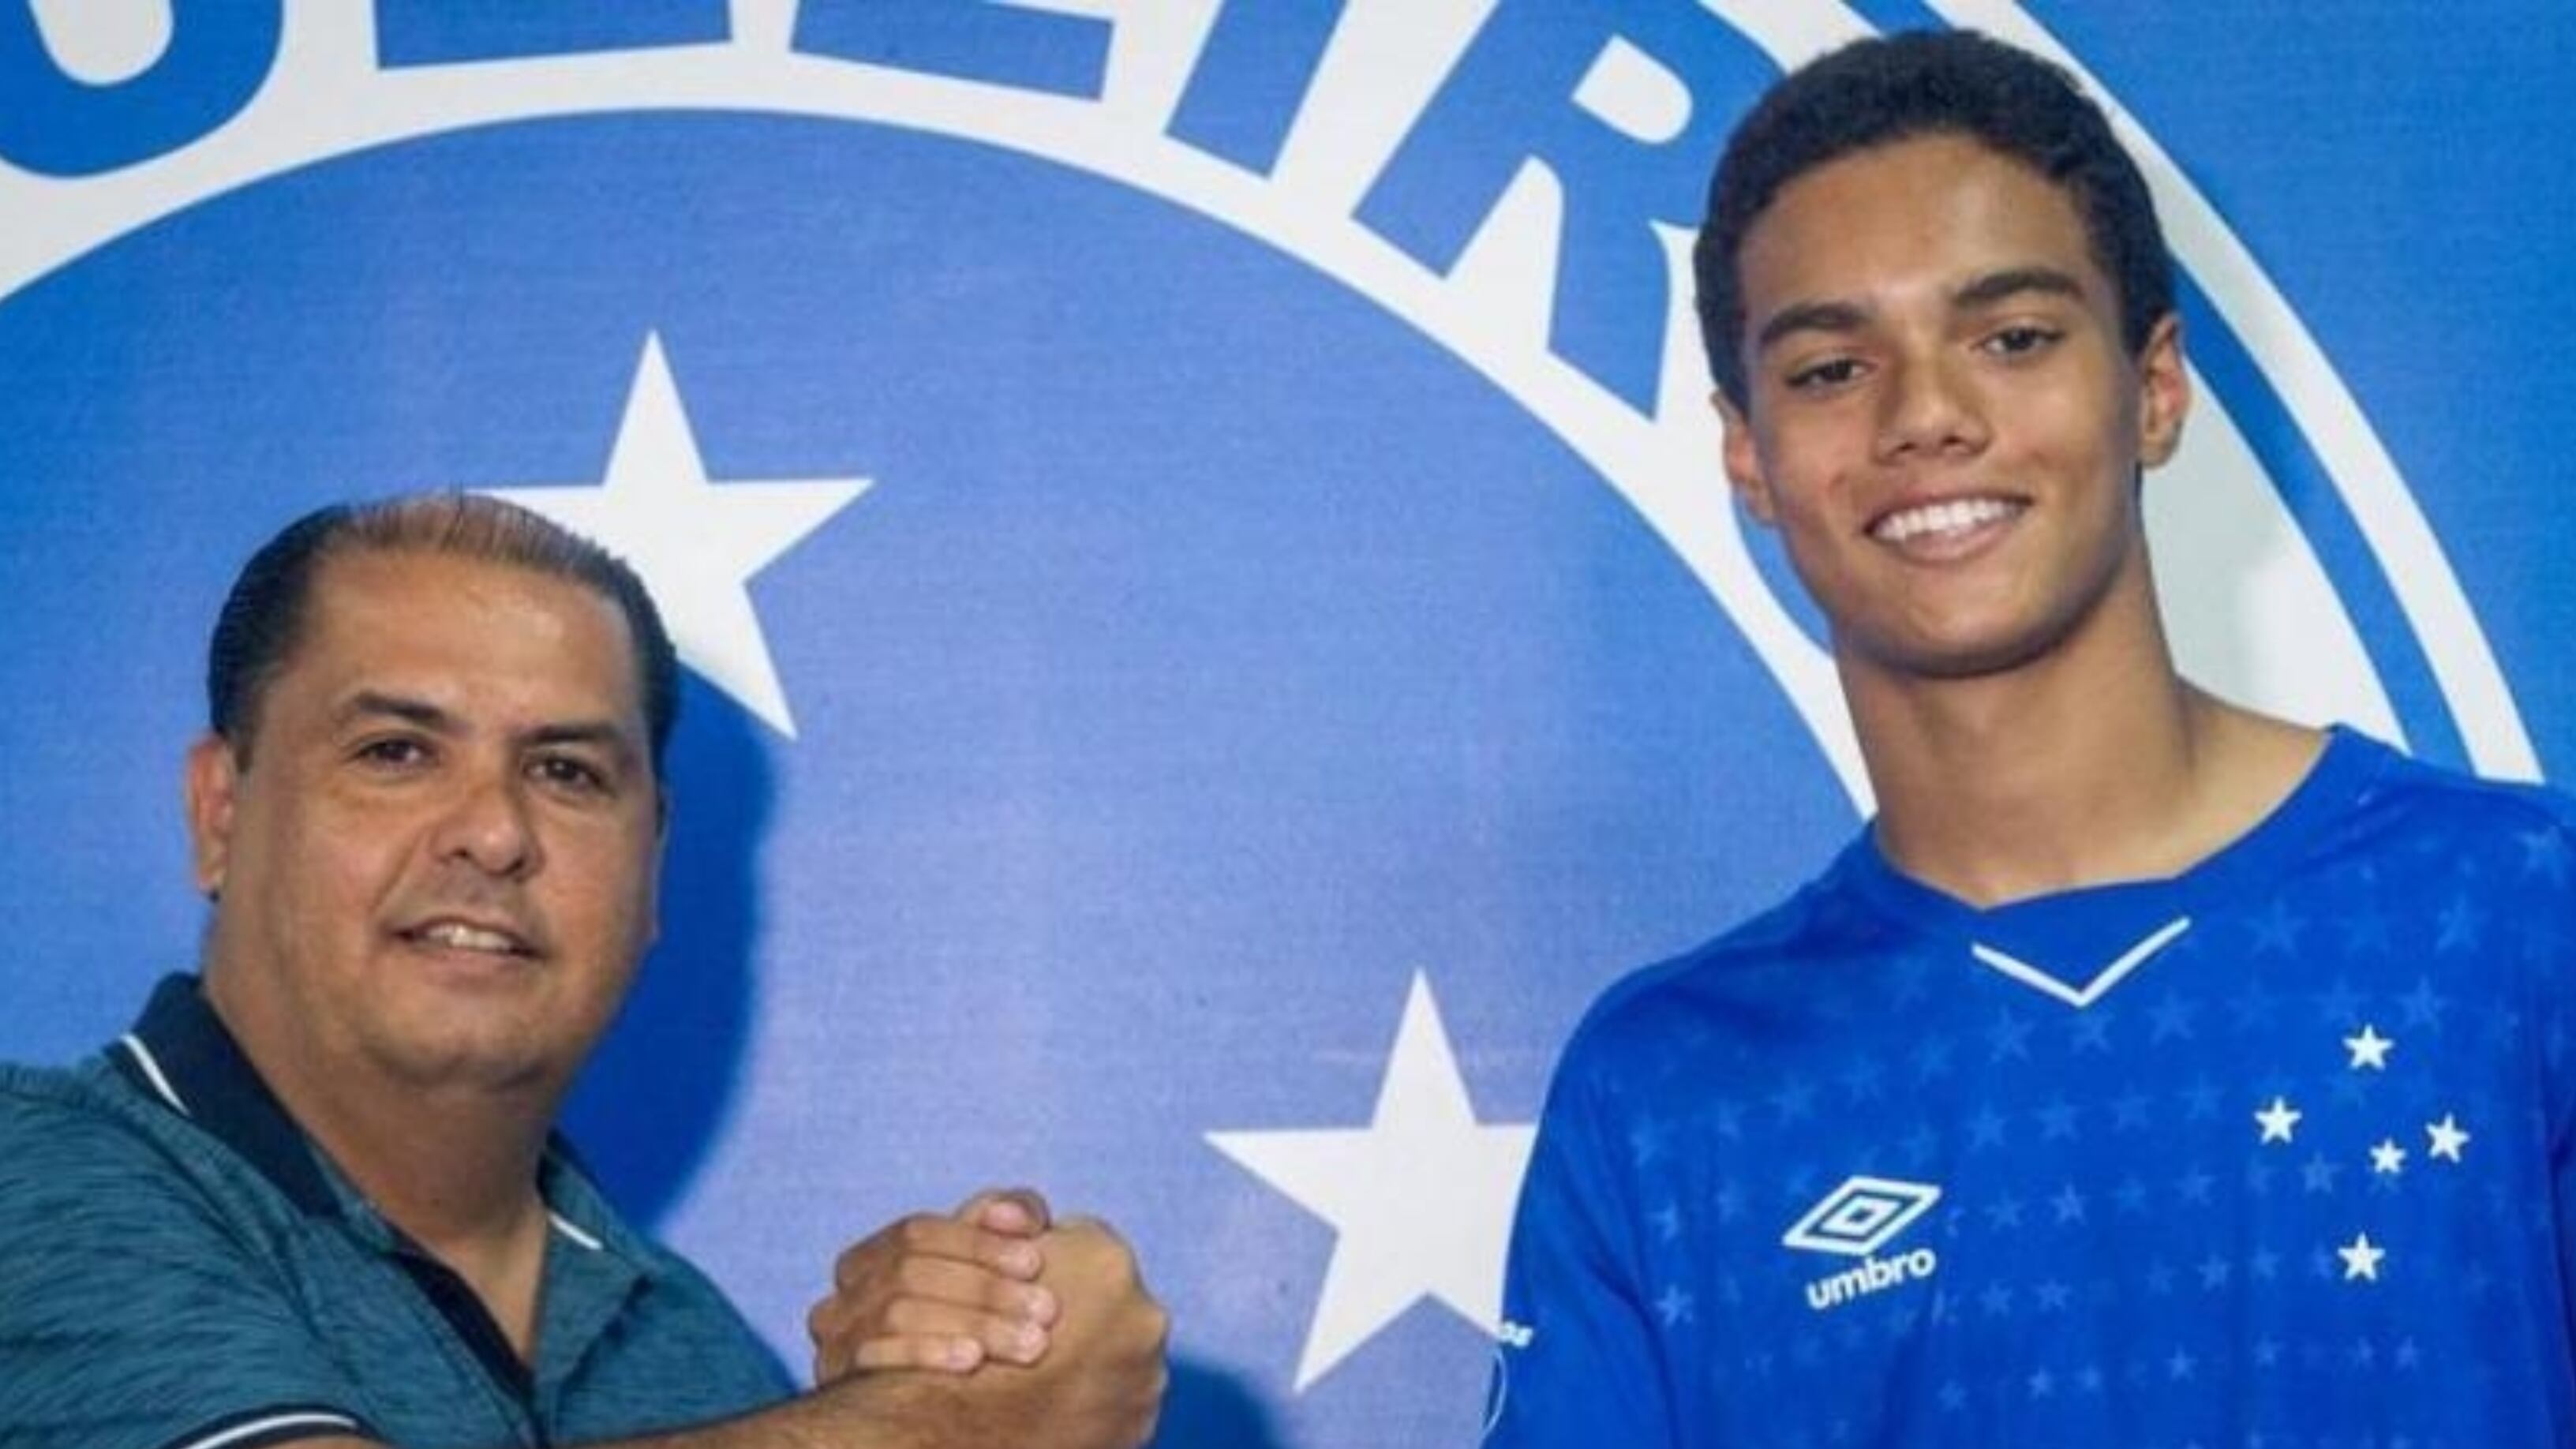 How Joao Mendes plays, the son of Ronaldinho, who is a professional footballer